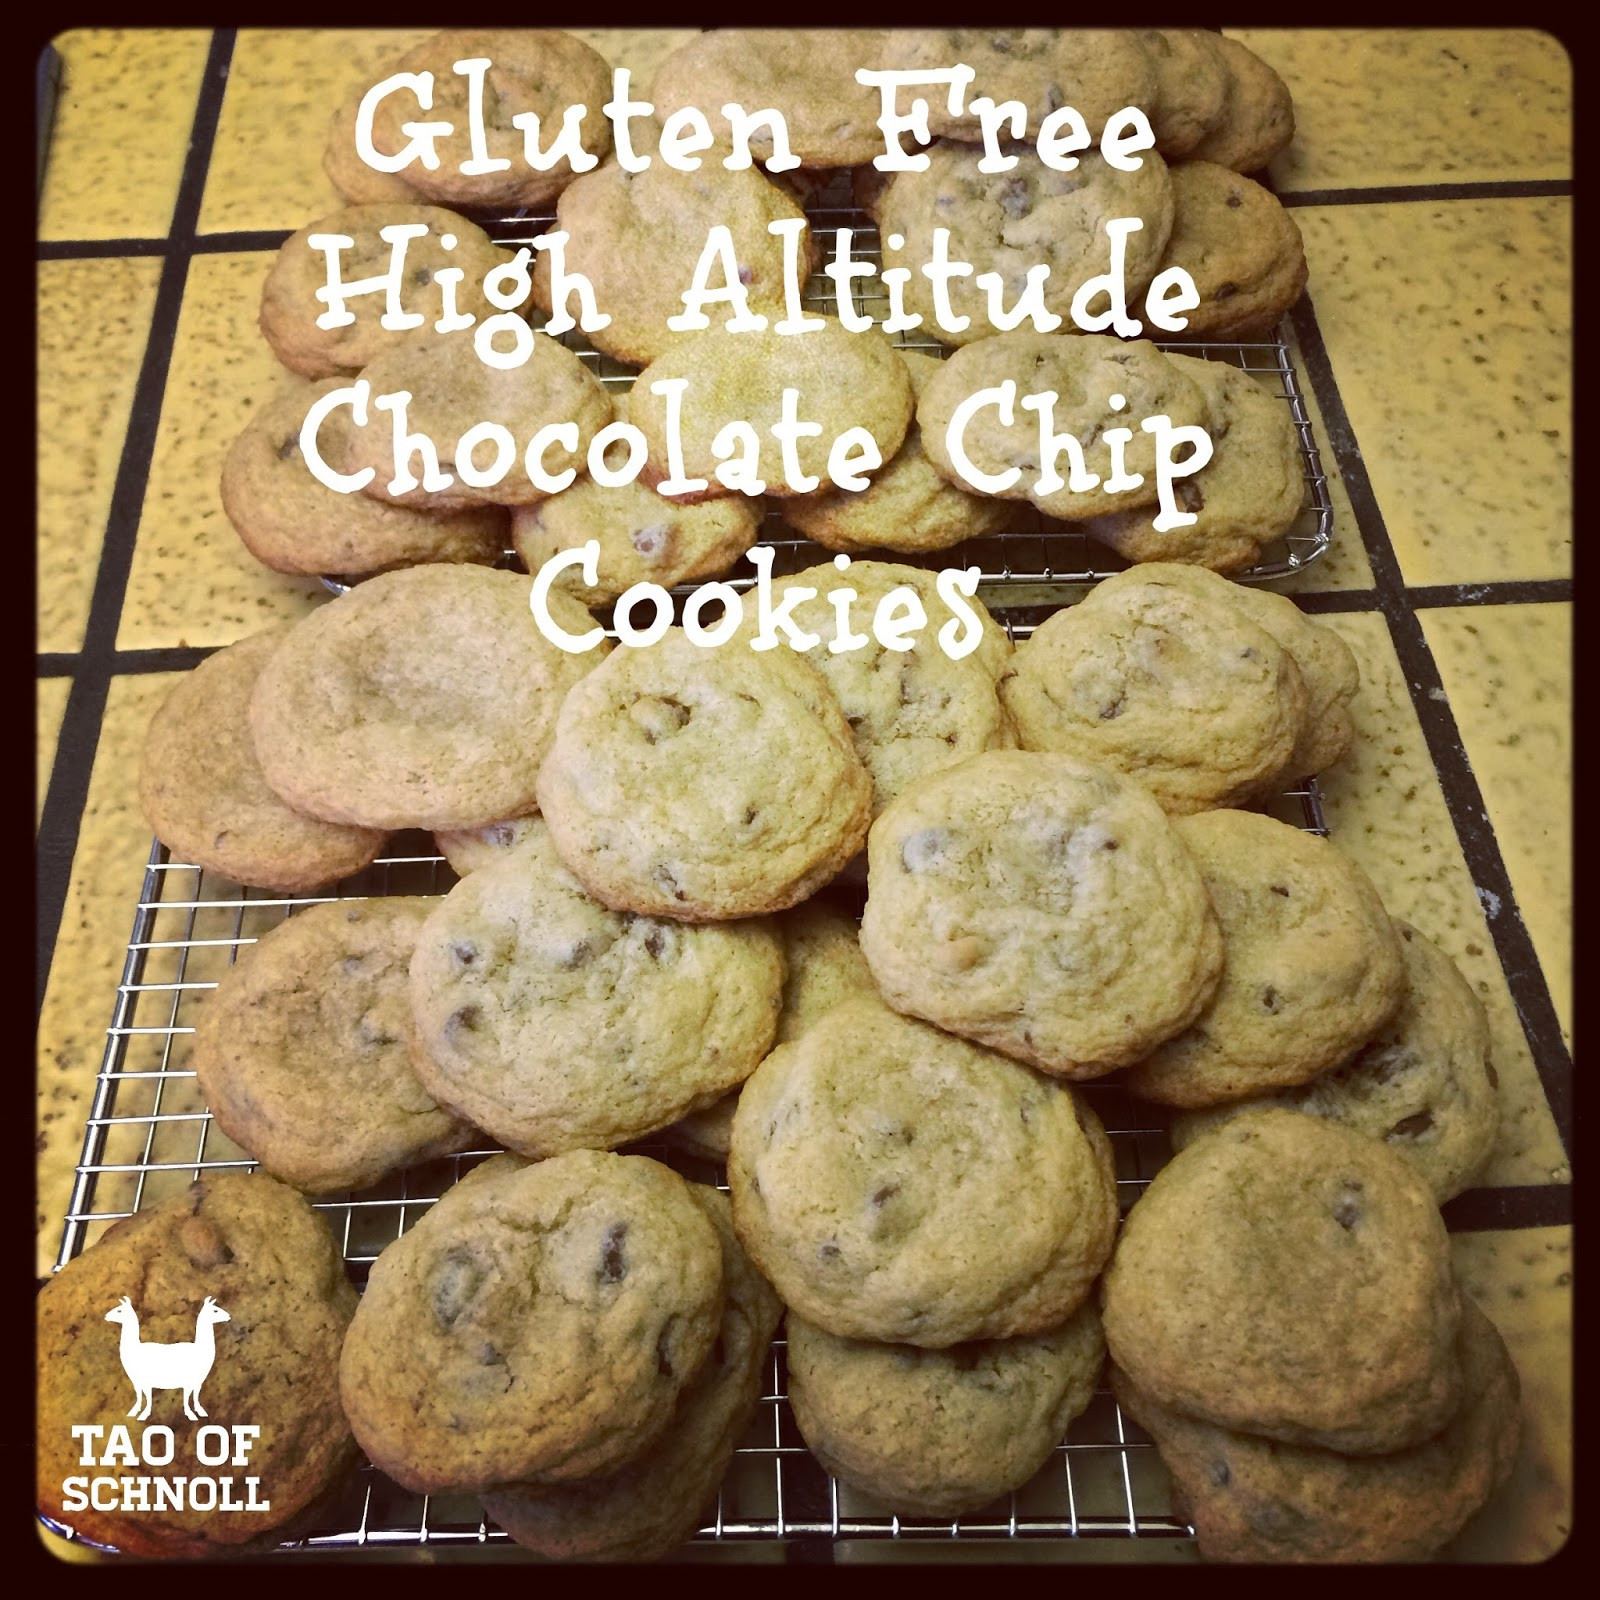 High Altitude Chocolate Chip Cookies
 Tao of Schnoll Gluten Free High Altitude Classic